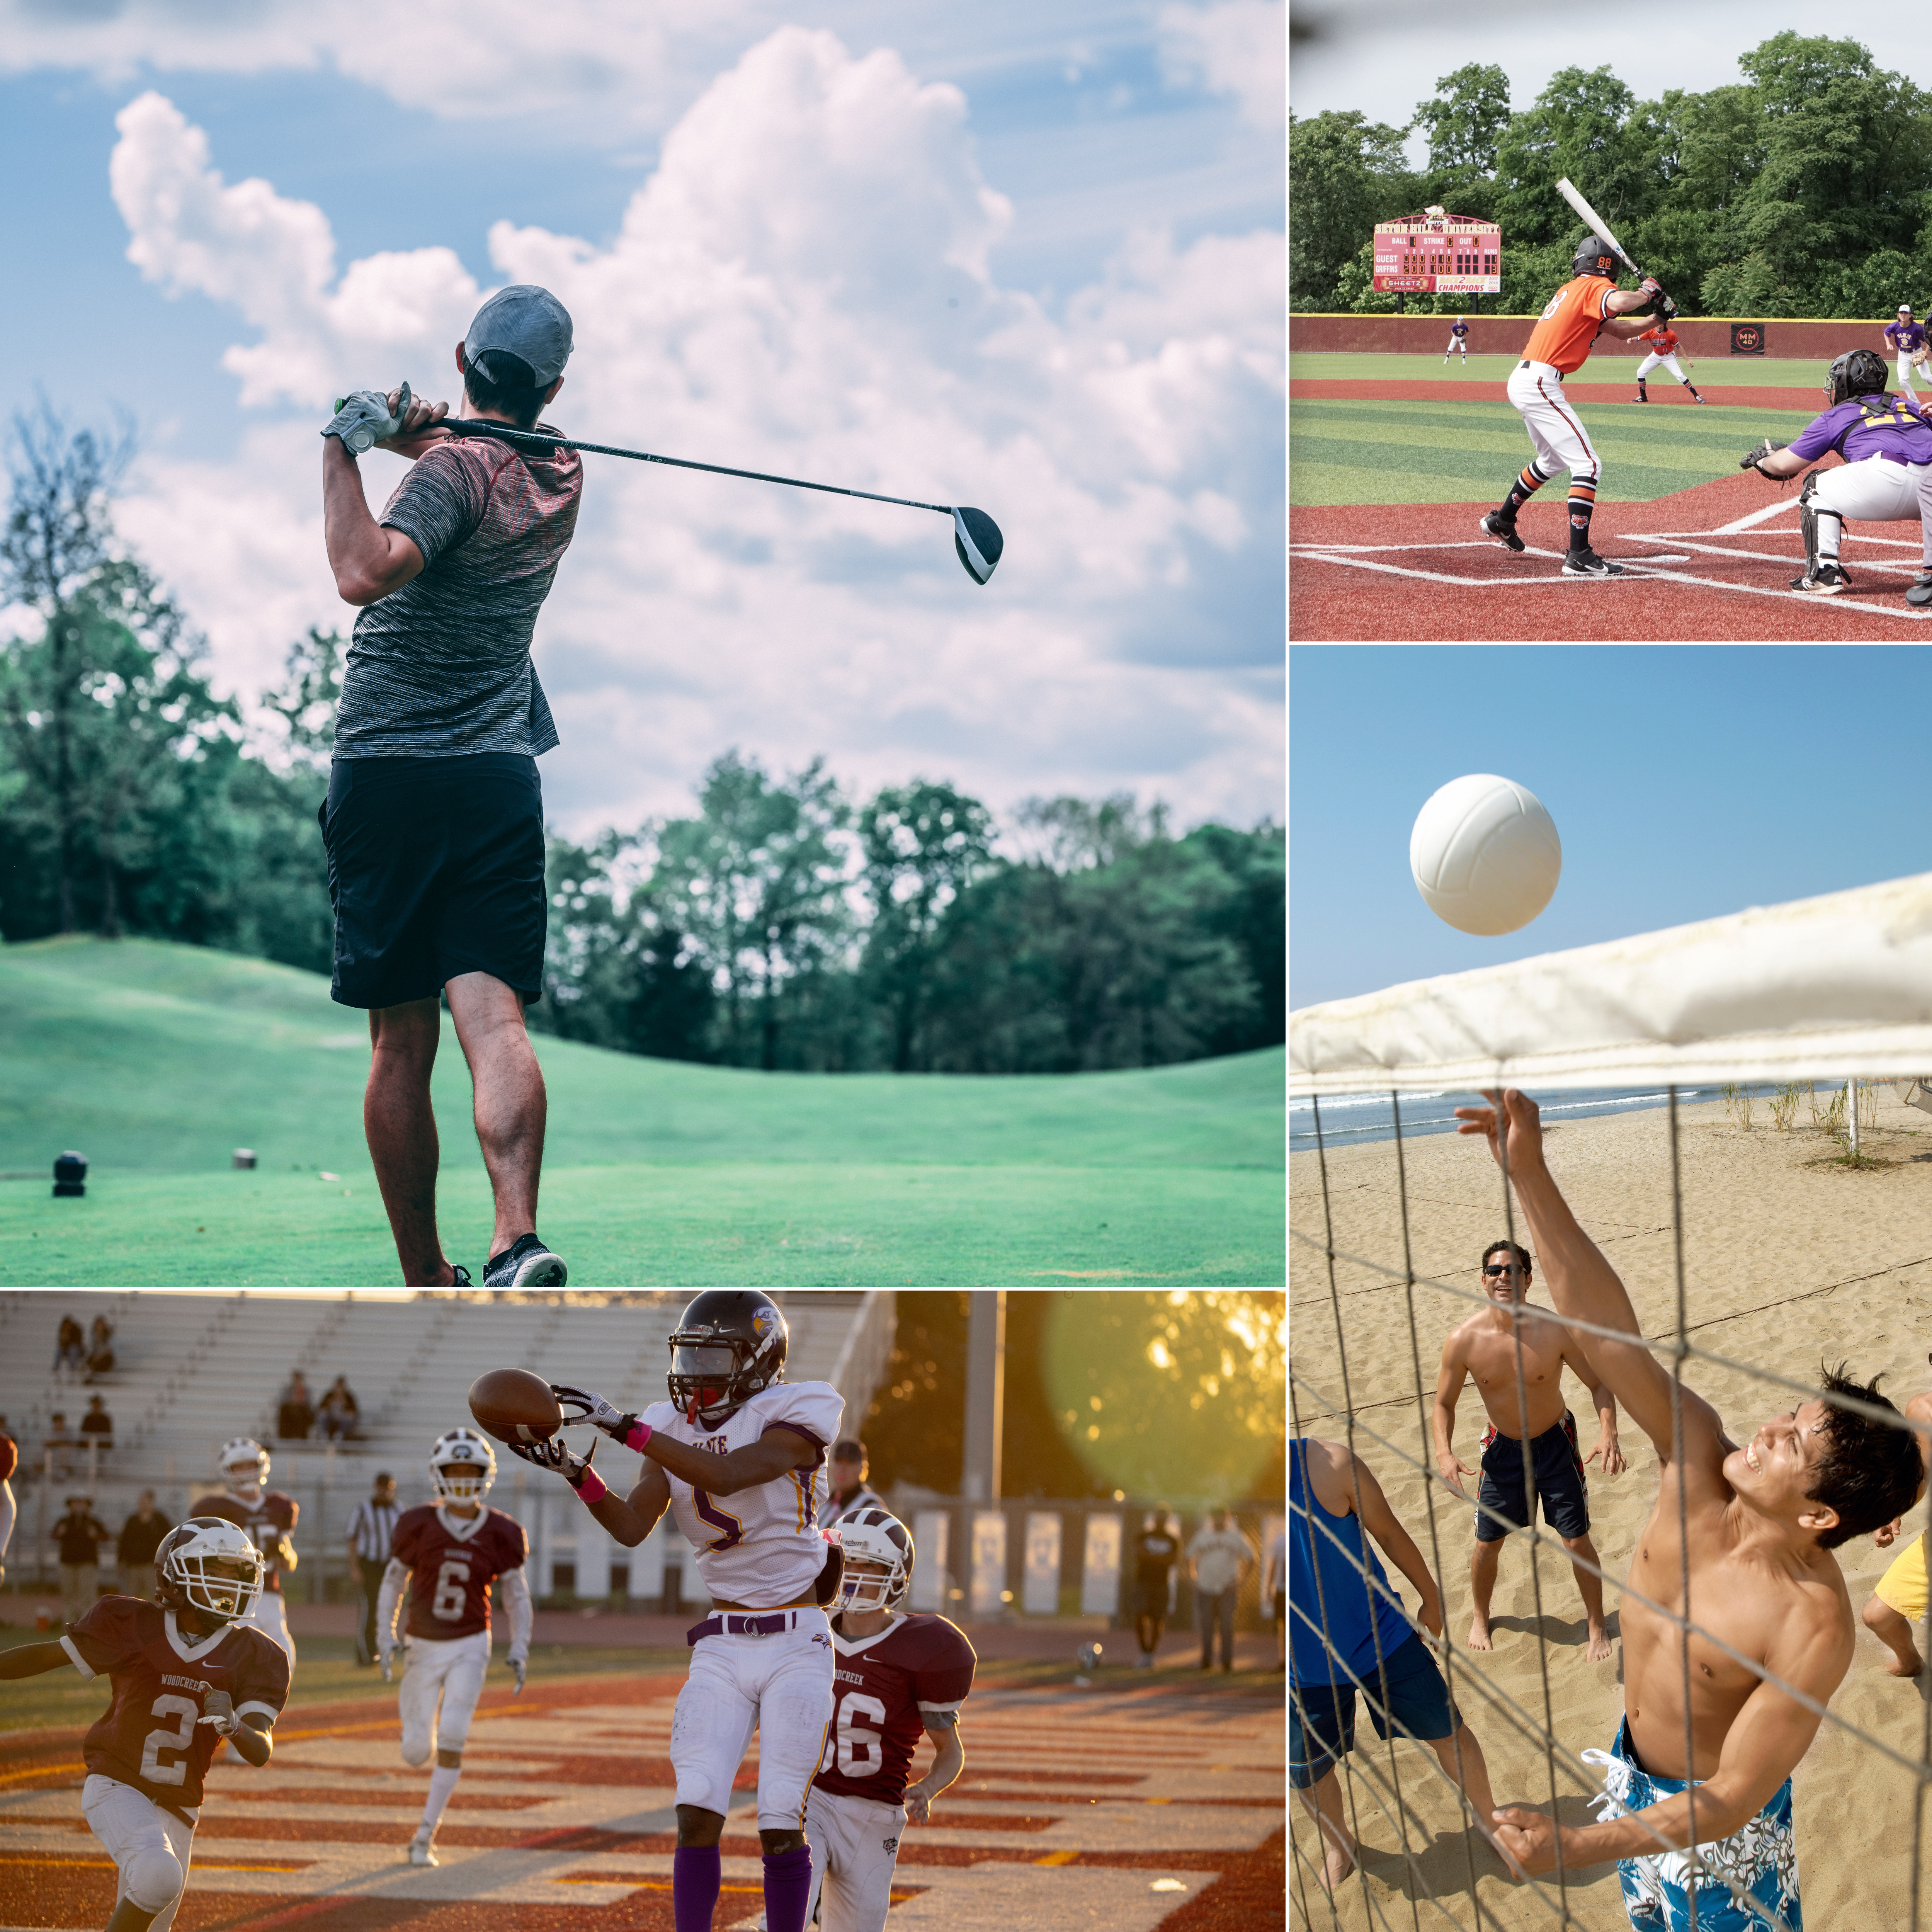 Rejuvenate U supports men in all sports, including, golf, volleyball, beach volleyball, pickleball, yoga, etc.